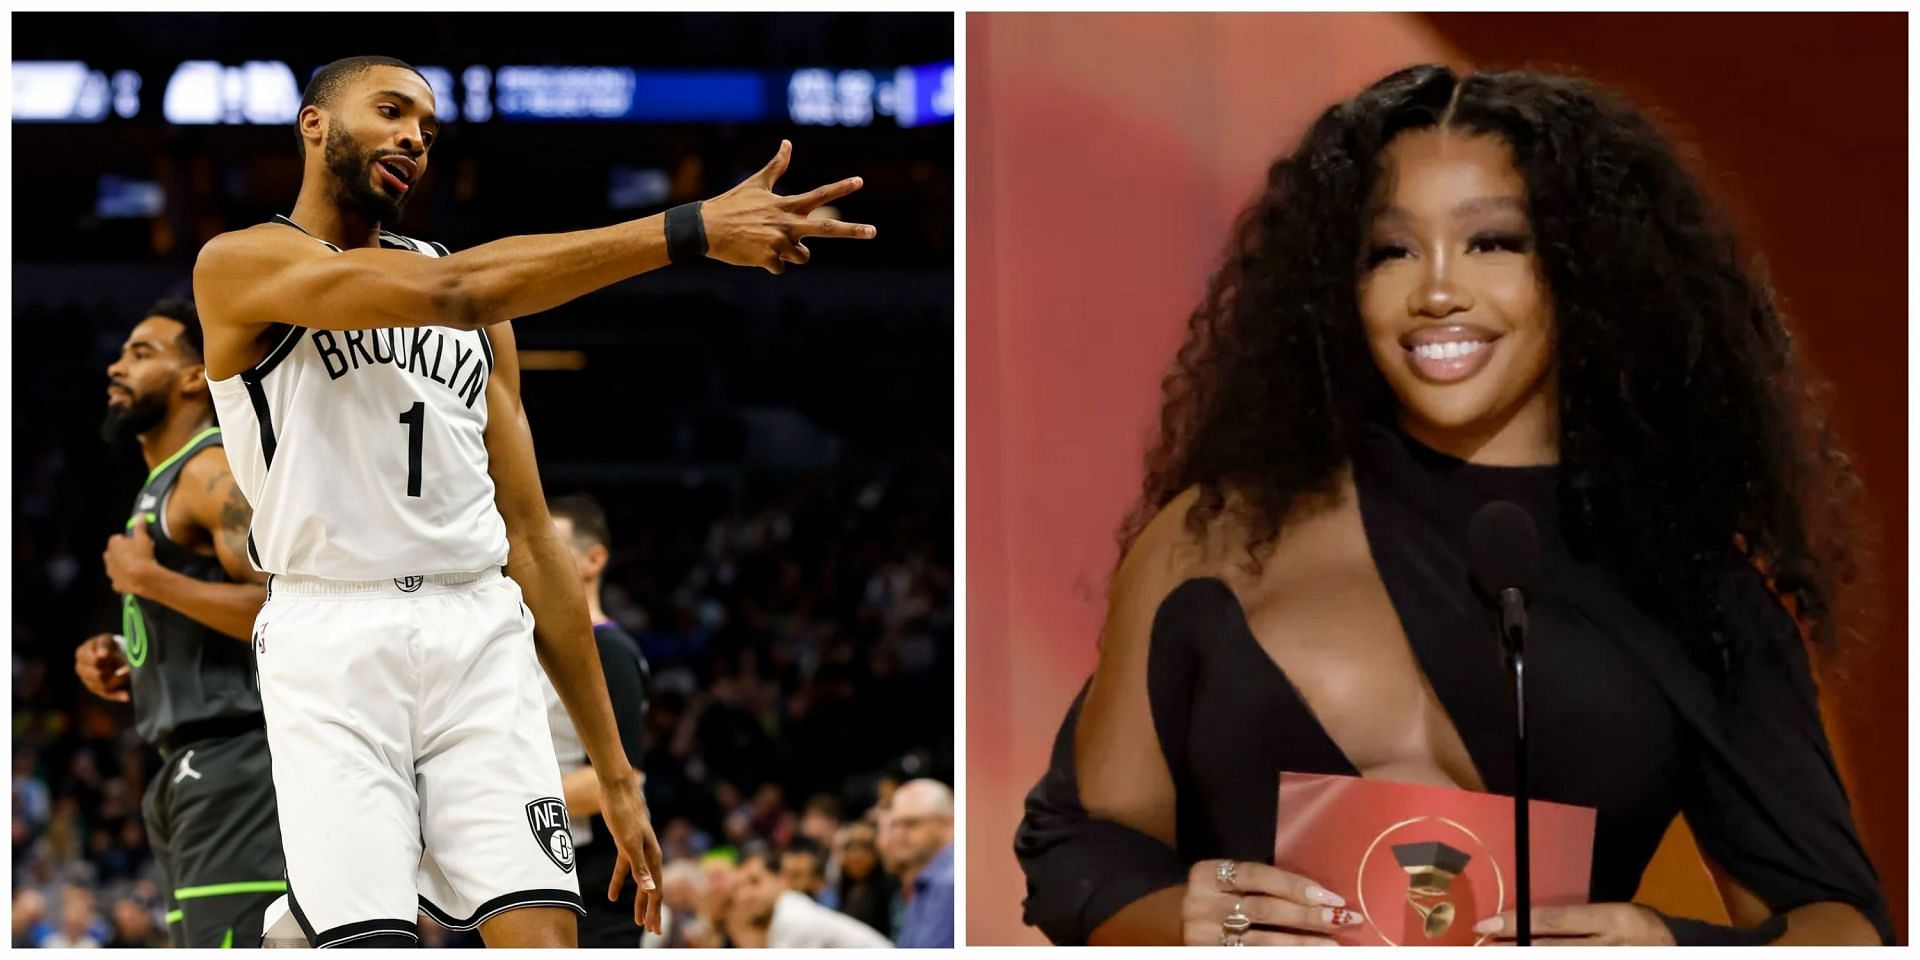 Fans react as Mikal Bridges play with singer-songwriter H.E.R.